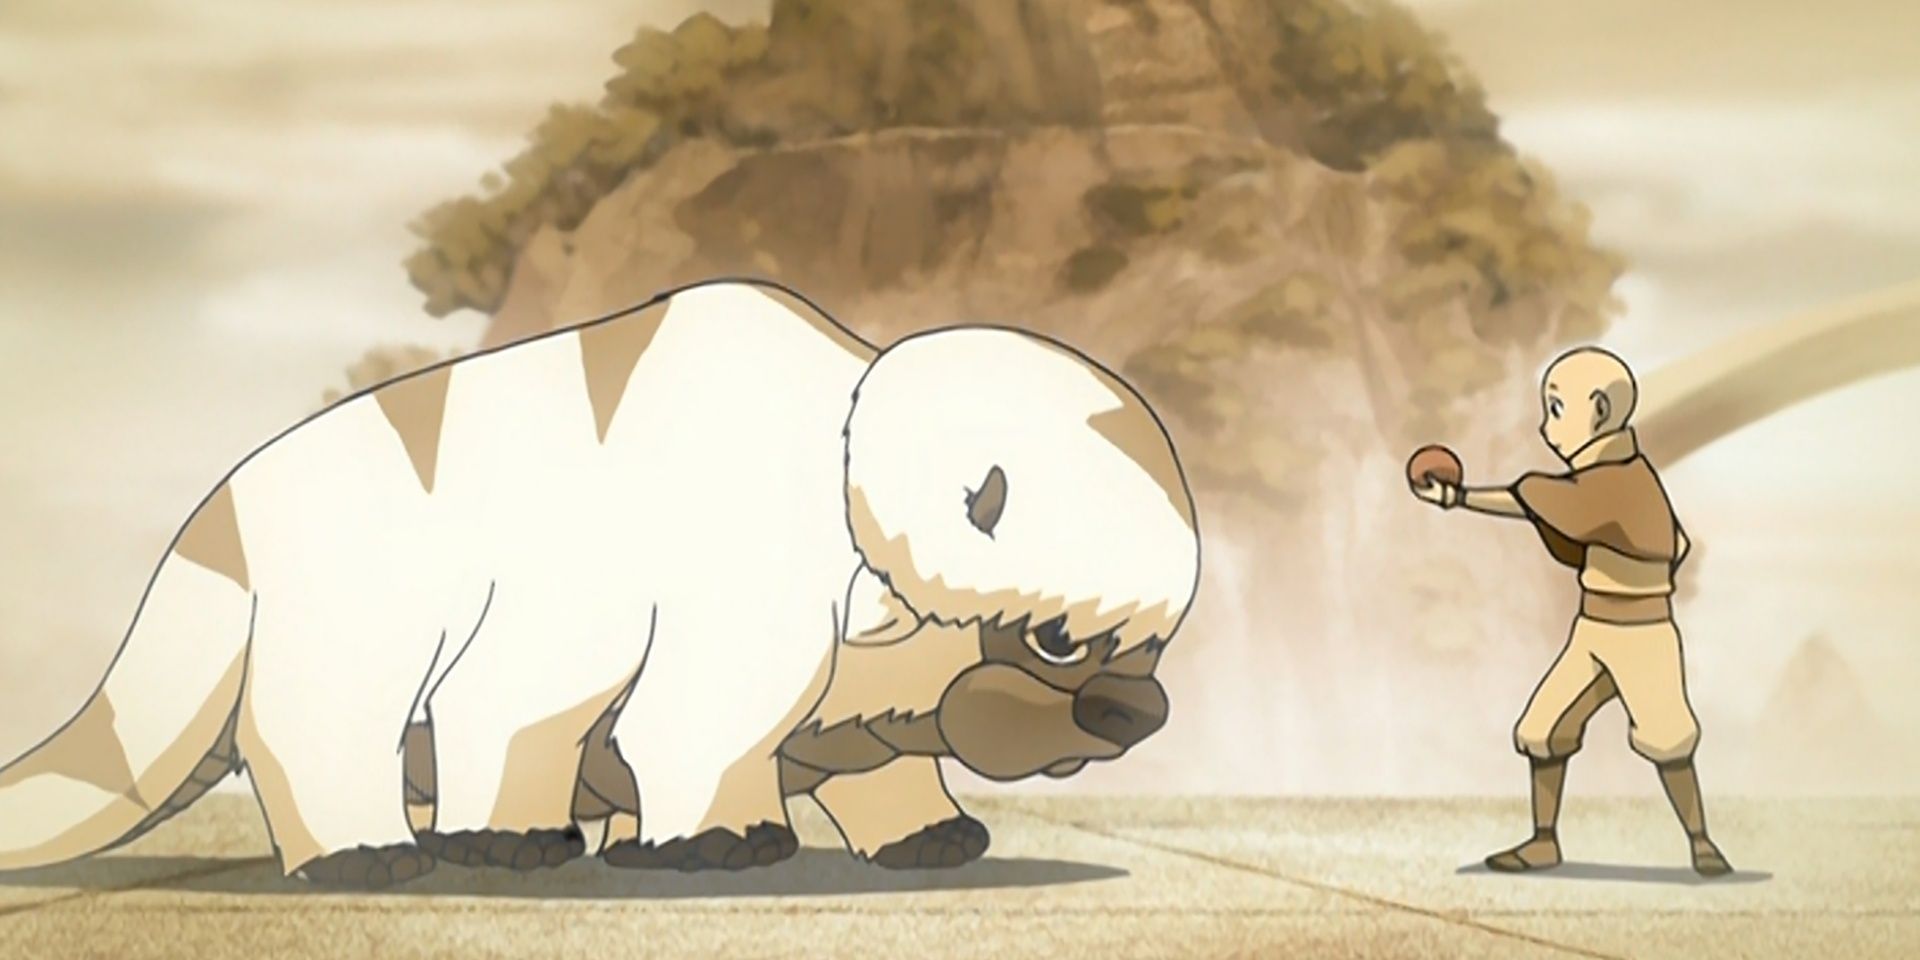 Aang offering Appa some food in Avatar: The Last Airbender